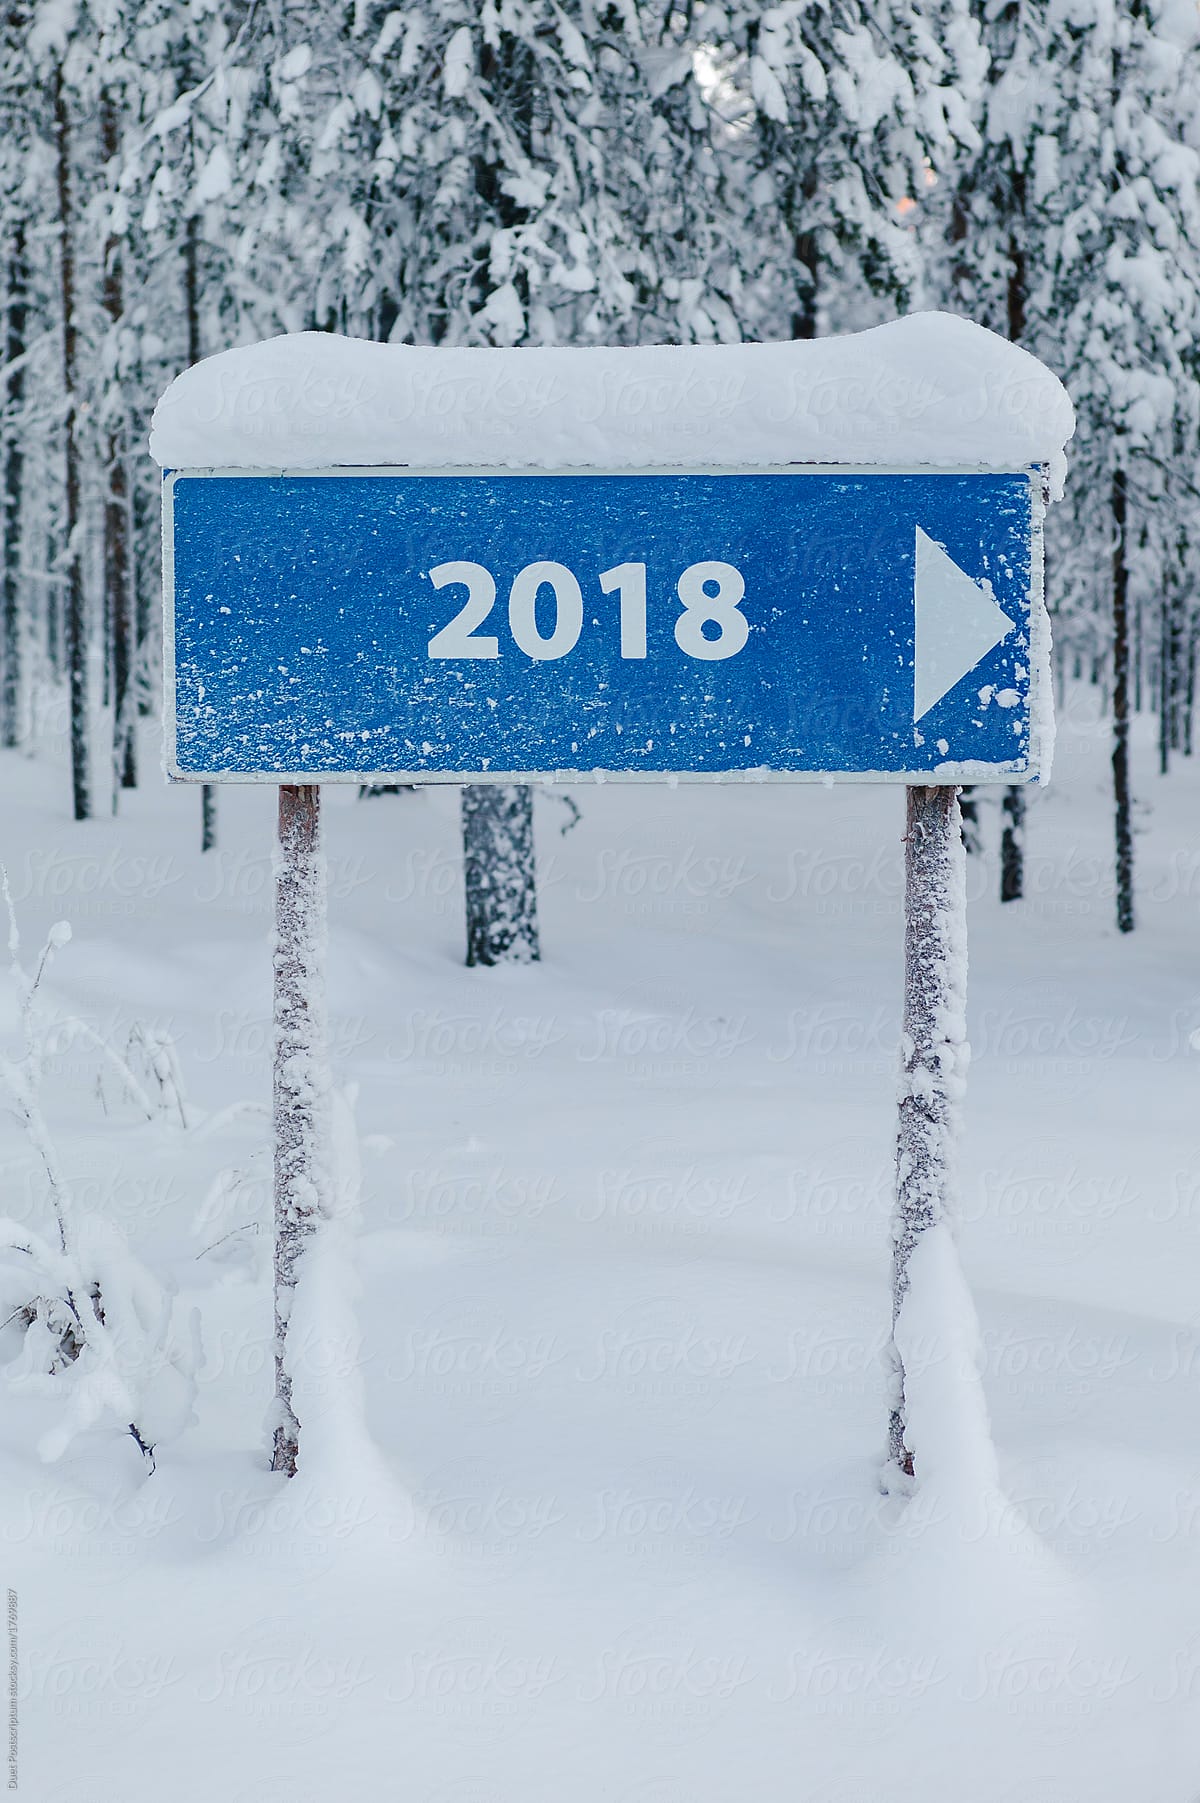 Direction sign 2018 in snowy woods